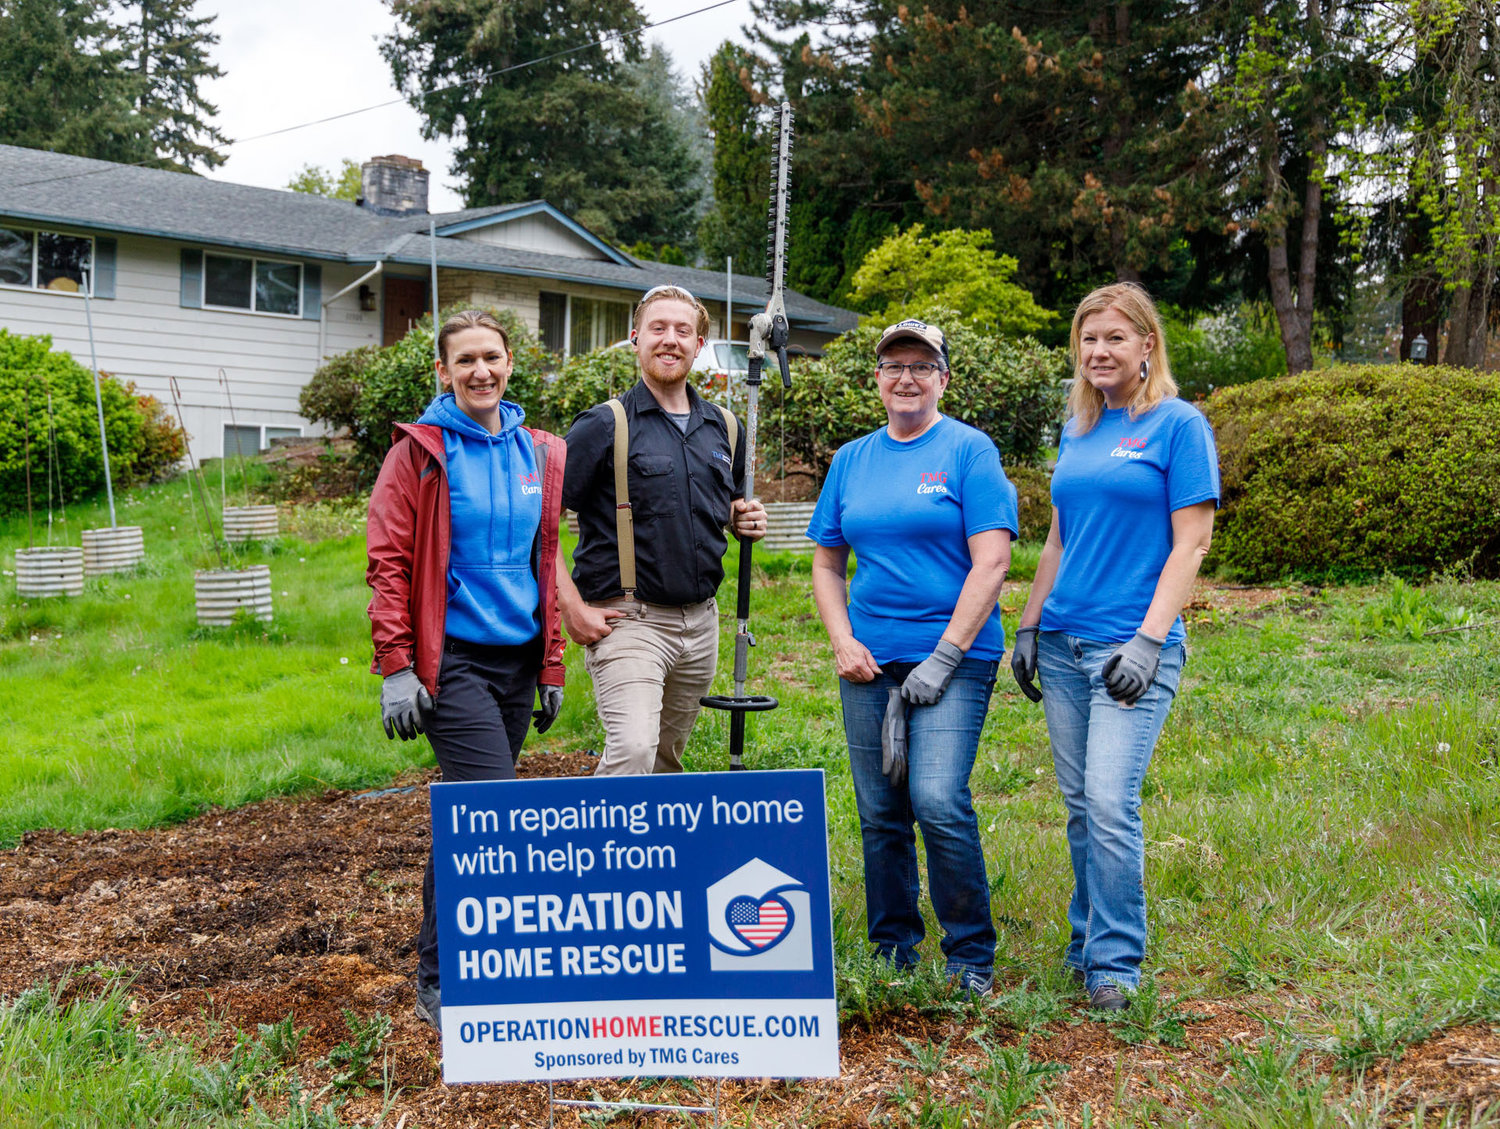 Cowlitz Tribe awards grant to support home improvement program for veterans